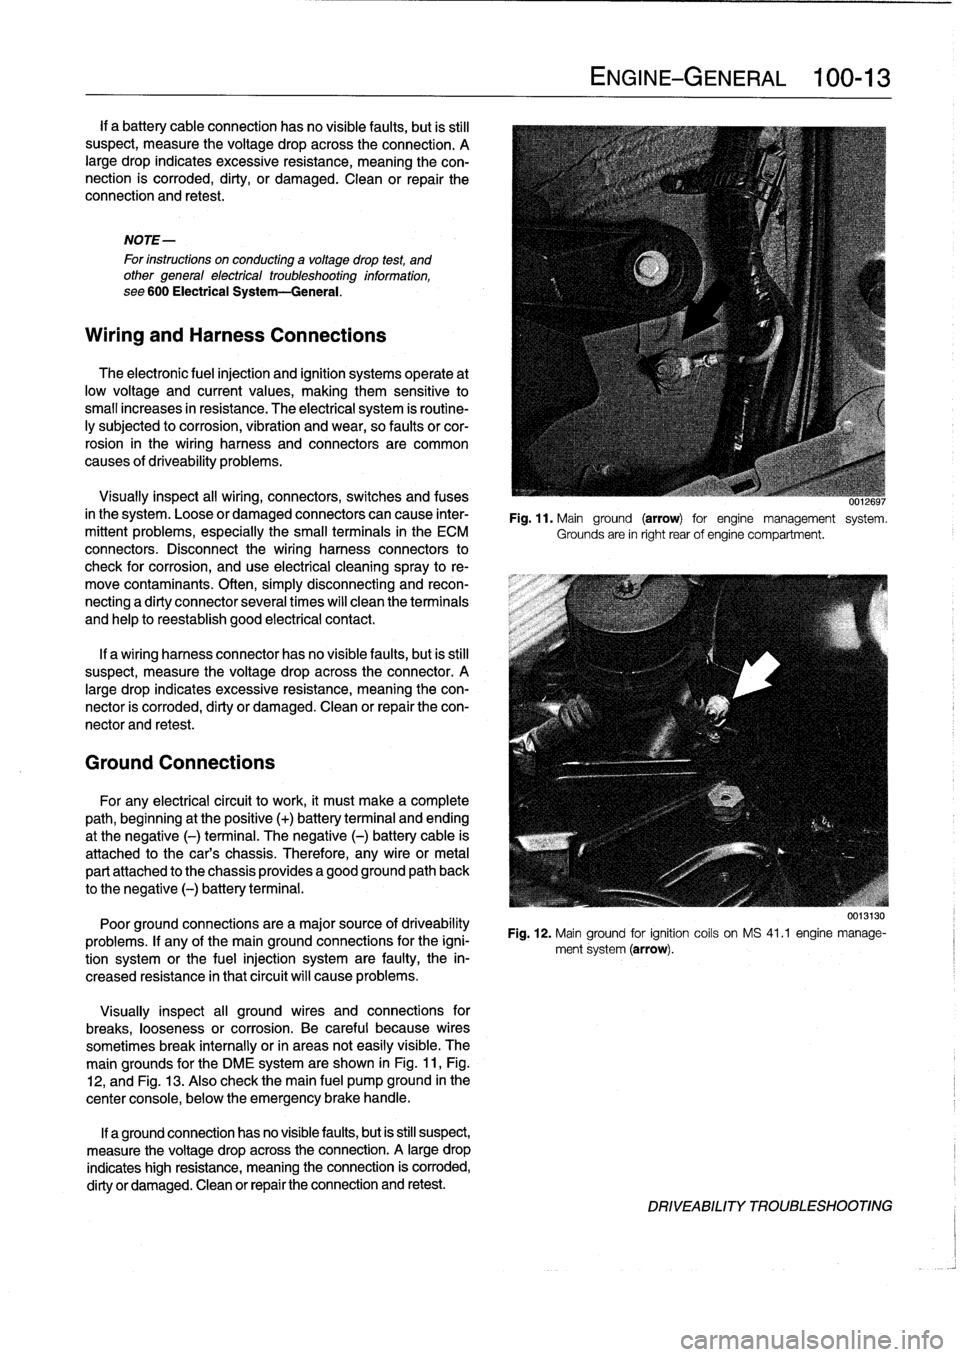 BMW 325i 1994 E36 Workshop Manual 
If
a
battery
cableconnection
hasno
visible
faults,
but
is
still
suspect,
measure
the
voltage
drop
across
the
connection
.
A
large
drop
indicates
excessive
resistance,
meaning
the
con-
nection
is
corr